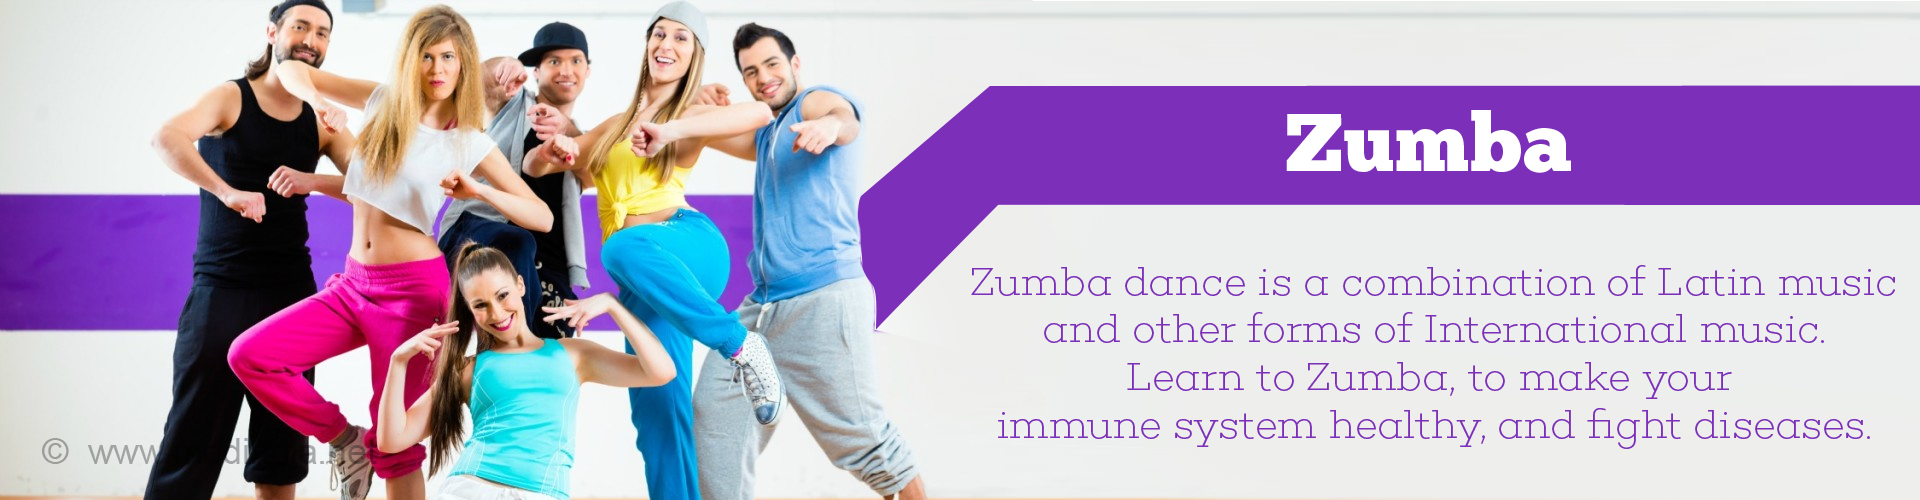 How to Zumba Dance Your Way to Good Health